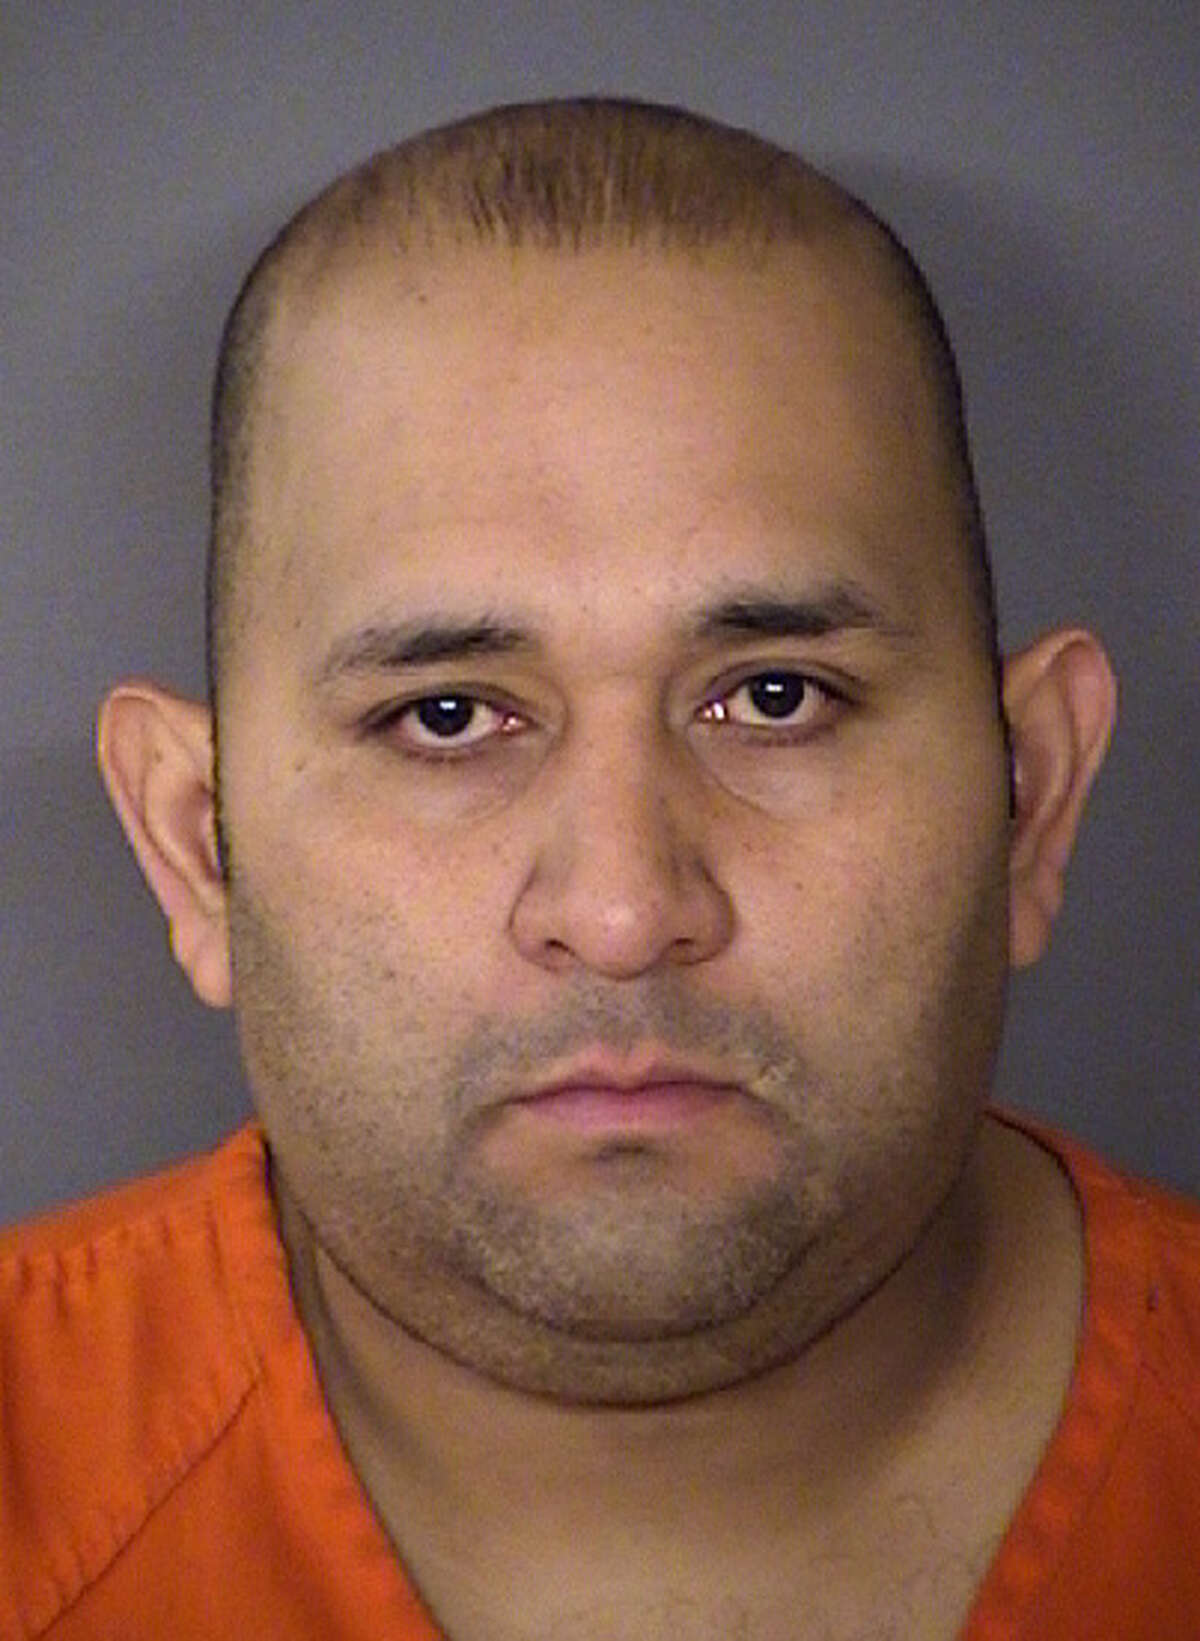 1.Robert C. Solis, 39, who also uses the name Homero Olveda, was arrested Thursday, Jan. 16, 2014, on a charge of aggravated kidnapping. Solis is accused of tying up his common law wife, terrorizing her with a stun gun and threatening to kill her.